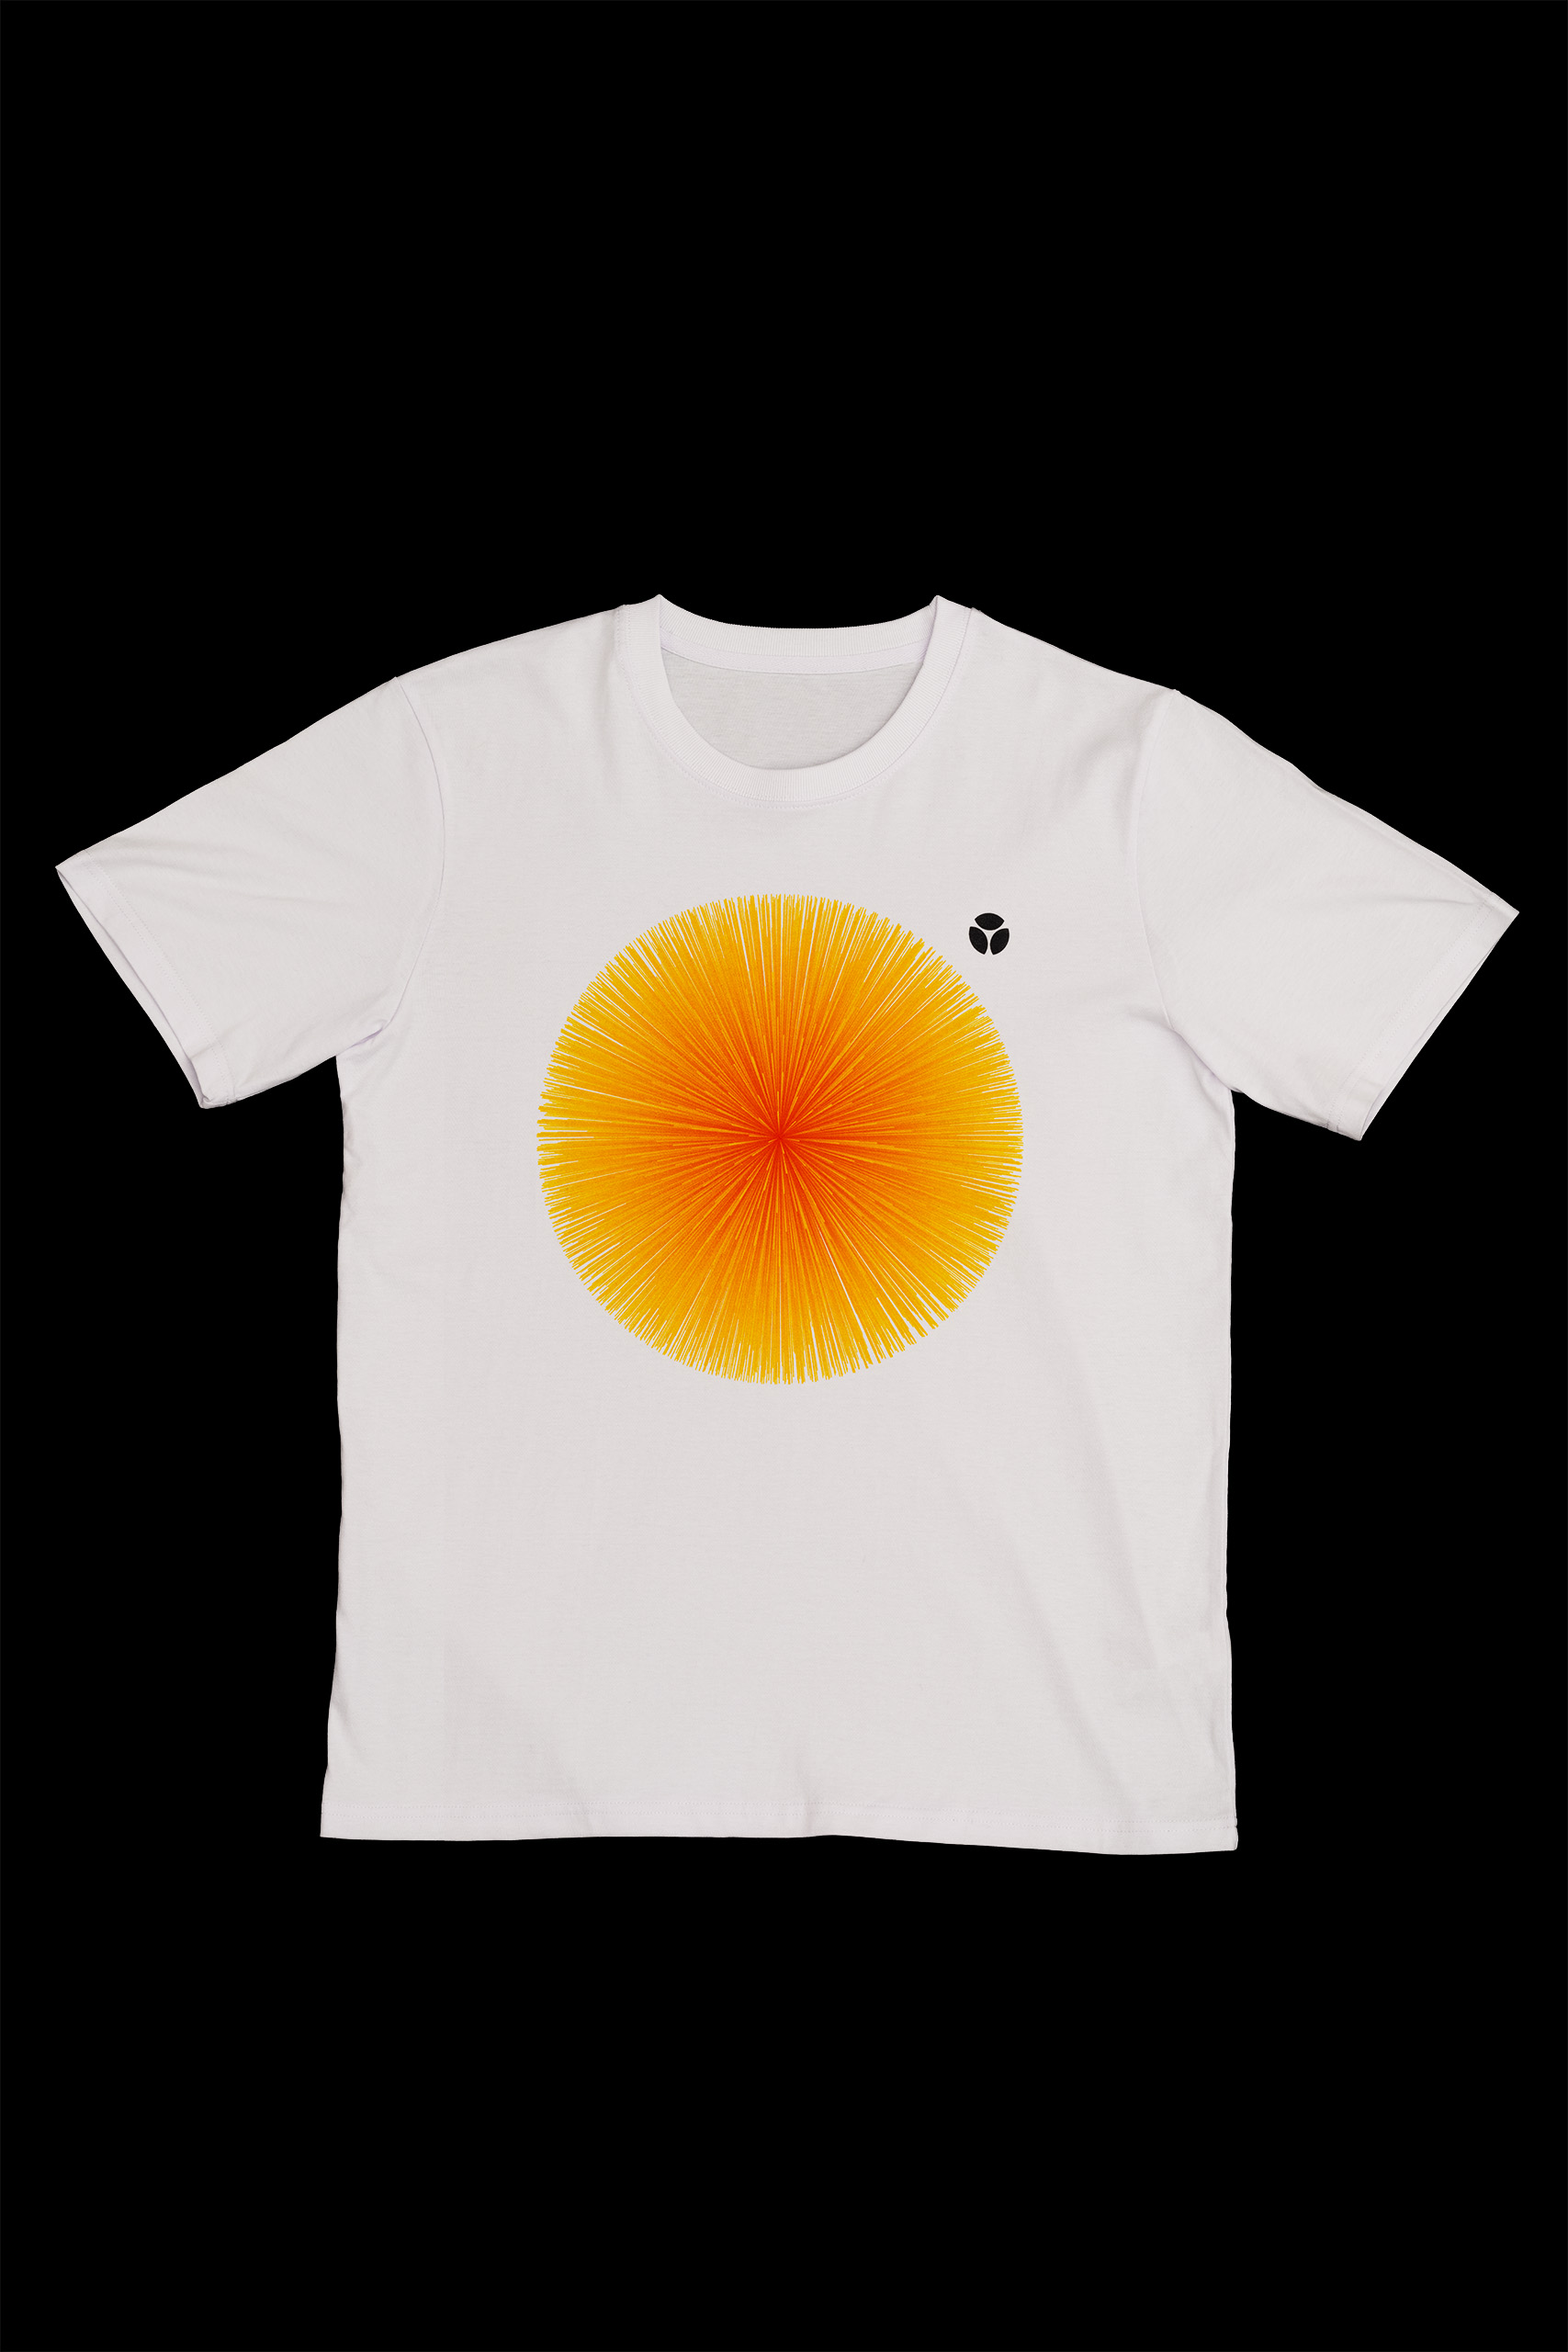 On a canvas of a white t-shirt, a medallion of orange and yellow unfurls in a radiant display, a fiery mimicry of the sun's own brilliance. Positioned centrally on the chest, this vibrant burst commands attention, its color a stark contrast to the garment's purity. Near the shirt’s hem, a small, twin-petaled emblem echoes the circular motif, a subtle companion to the bold centerpiece. The tee rests against the inky void, its form laid out flat, sleeves gently outstretched, ready to be enlivened by the wearer, to carry a piece of sunshine into the everyday.